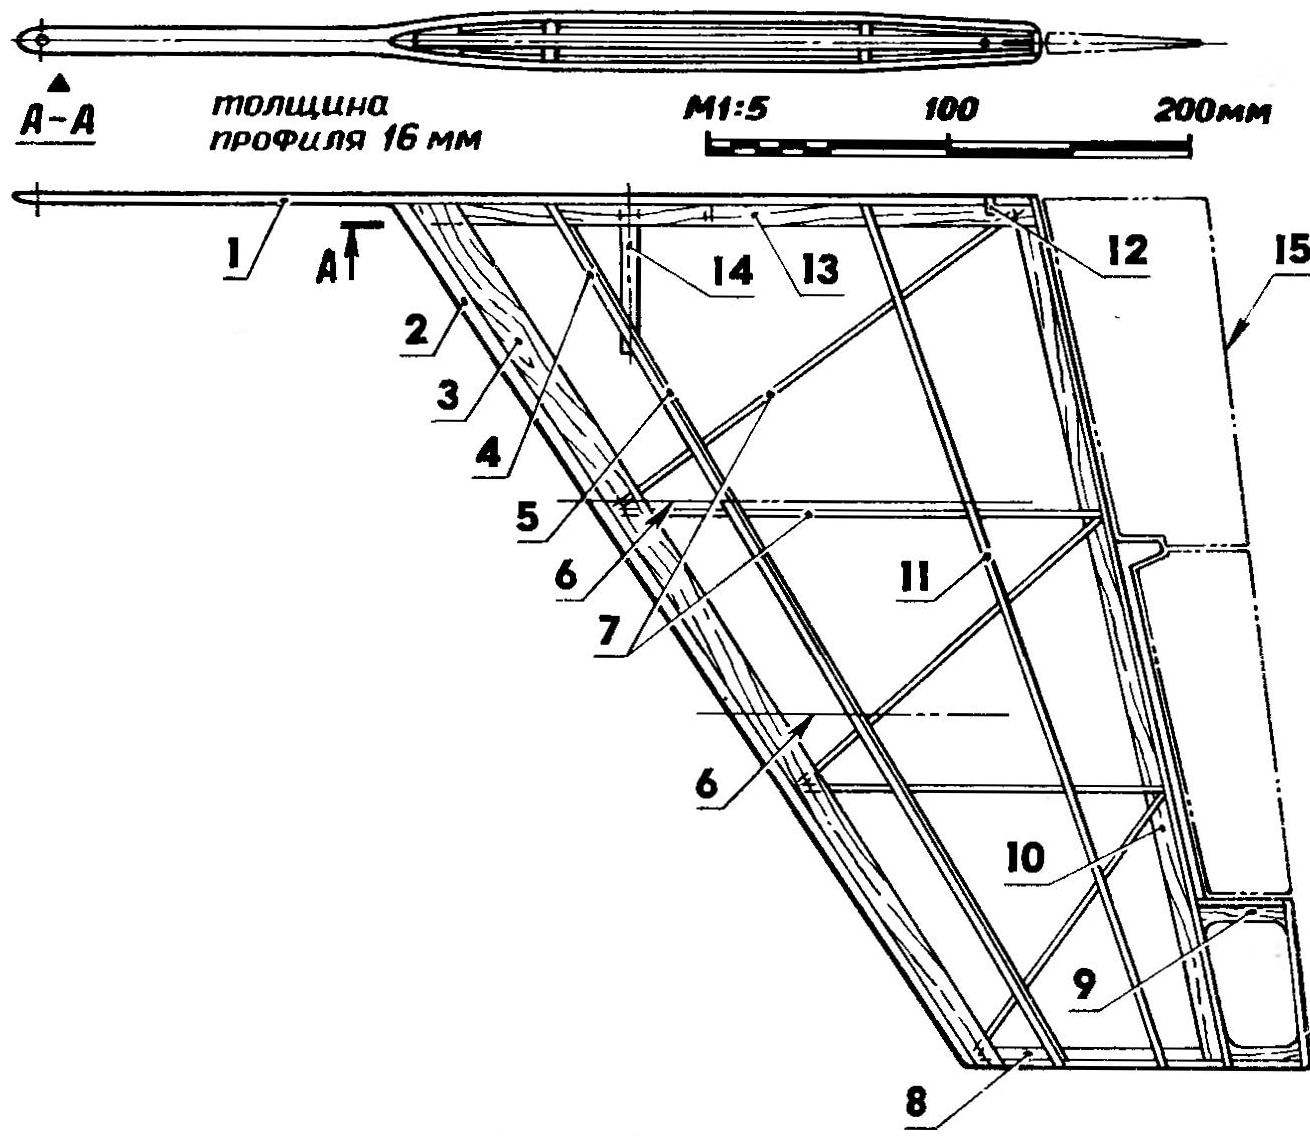 Fig. 5. Console wing